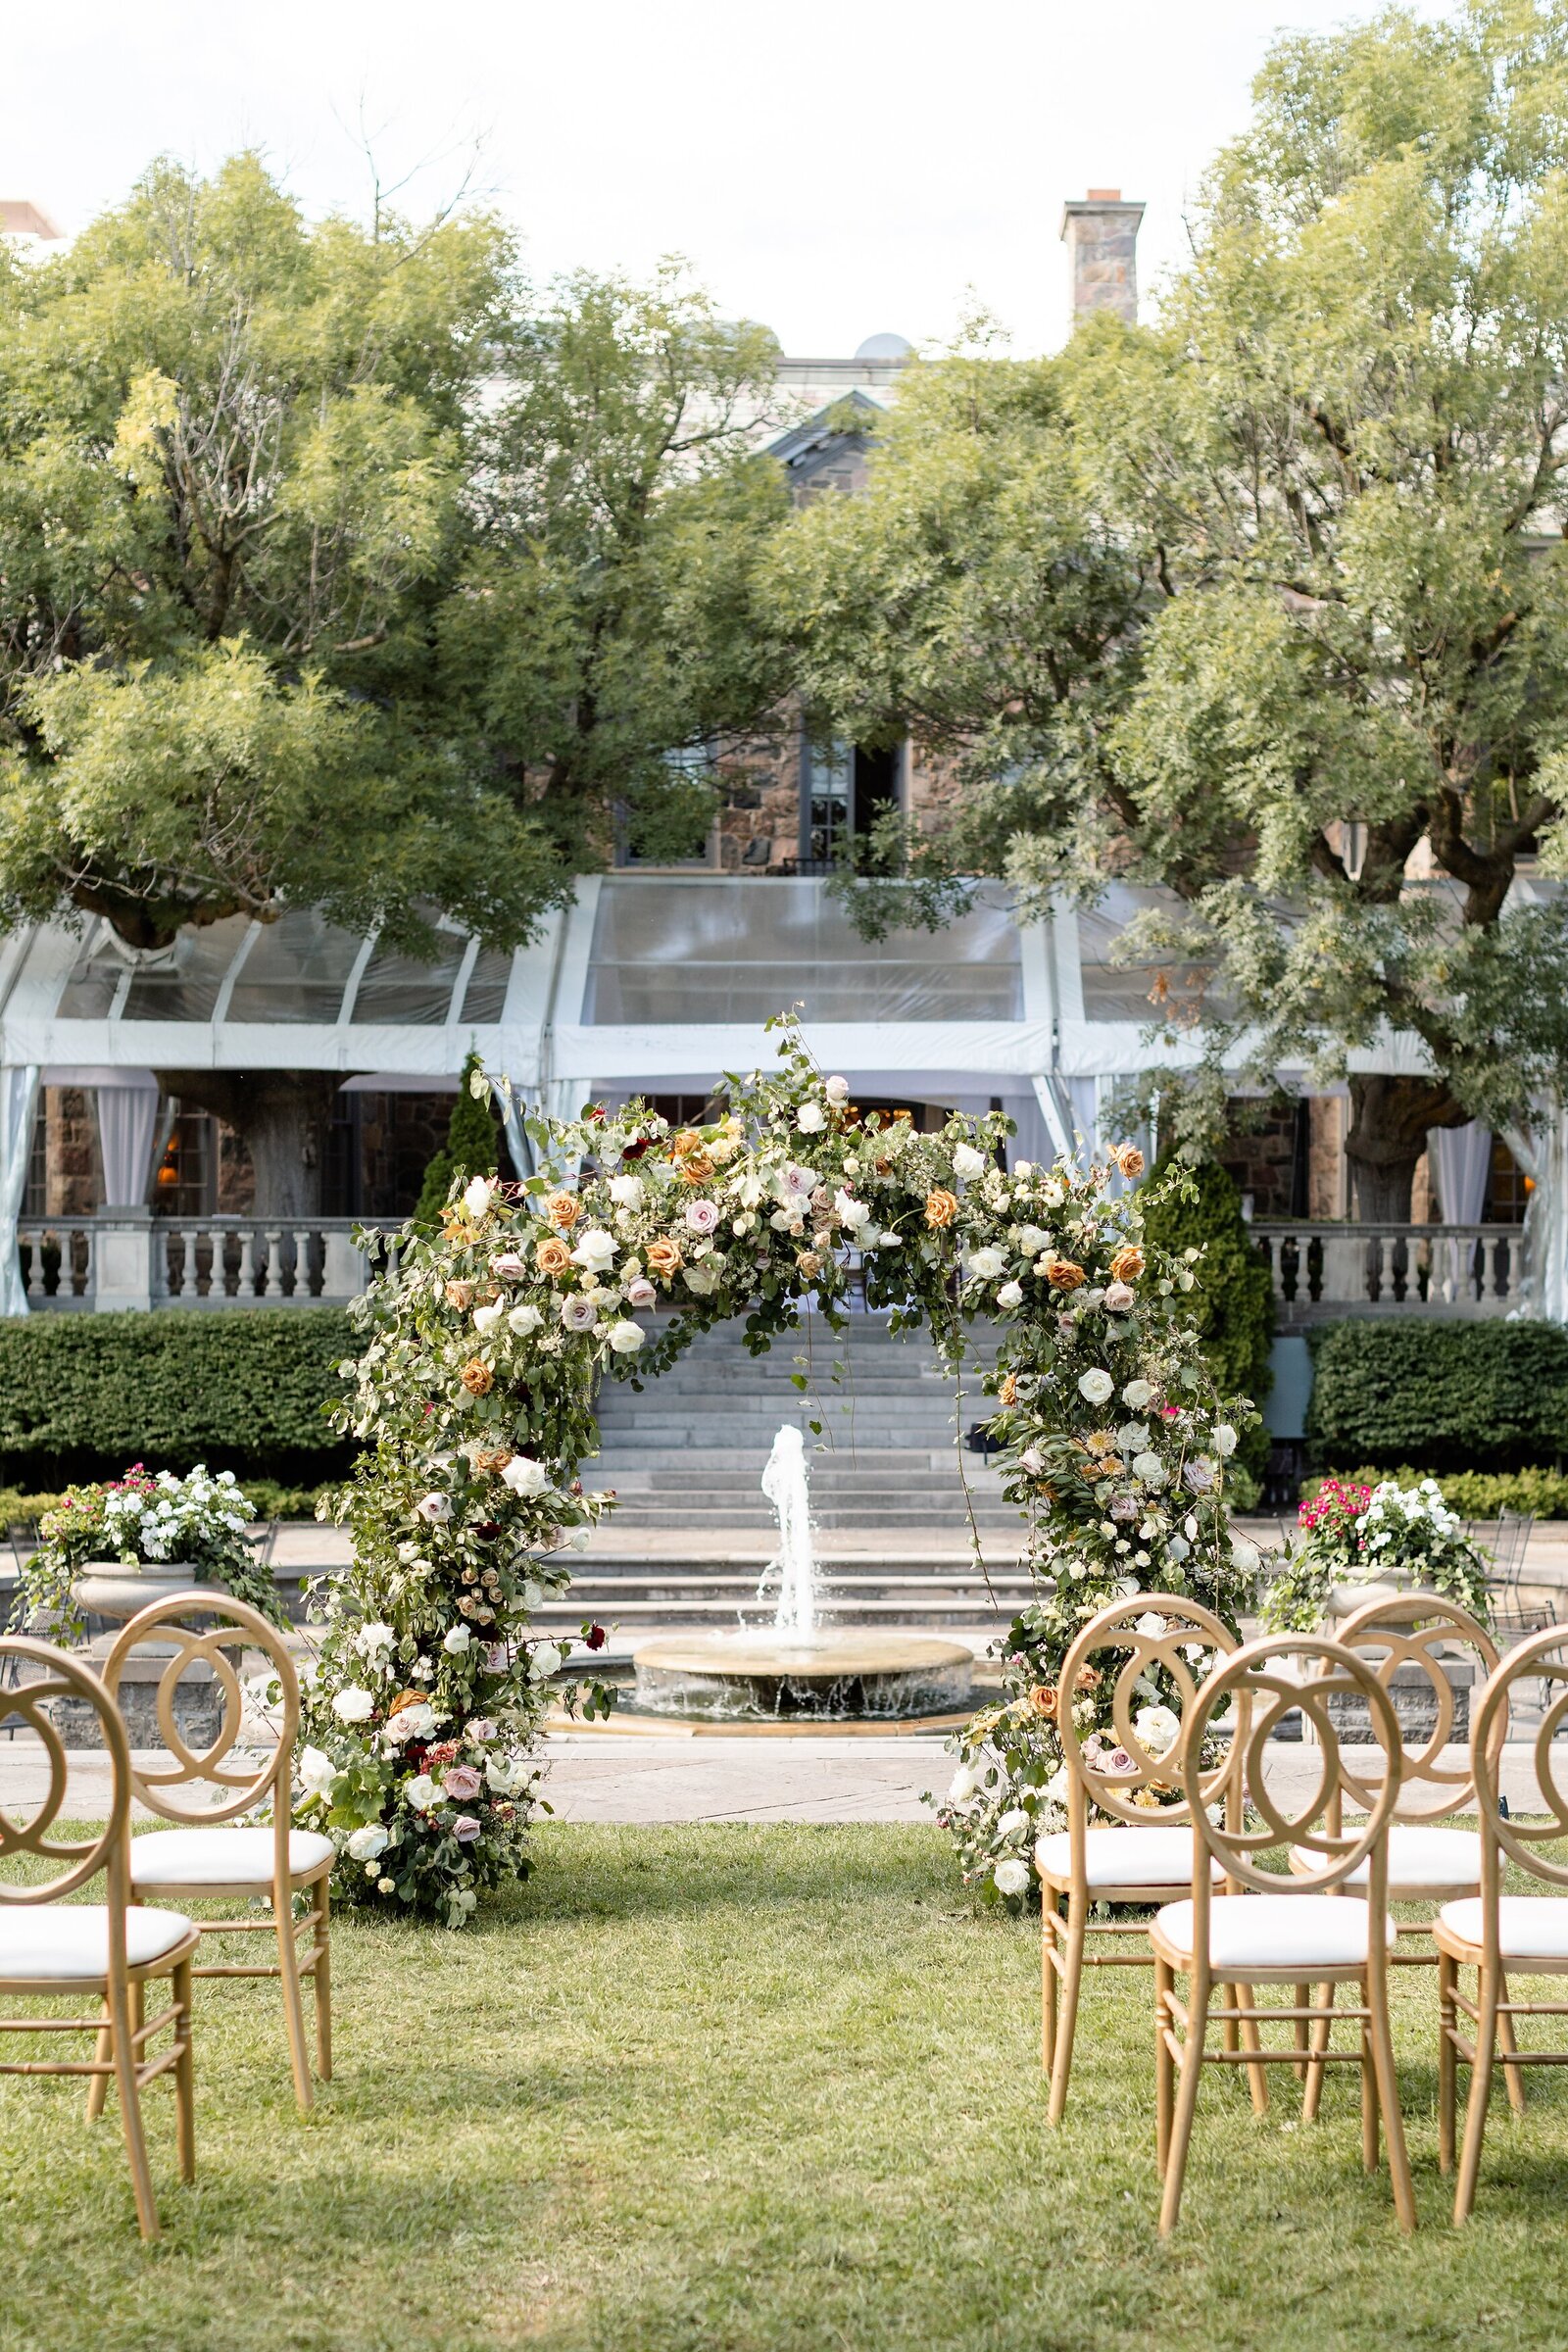 Outdoor-ceremony-floral-arch-with-gold-chairs-at-graydon-hall-manor